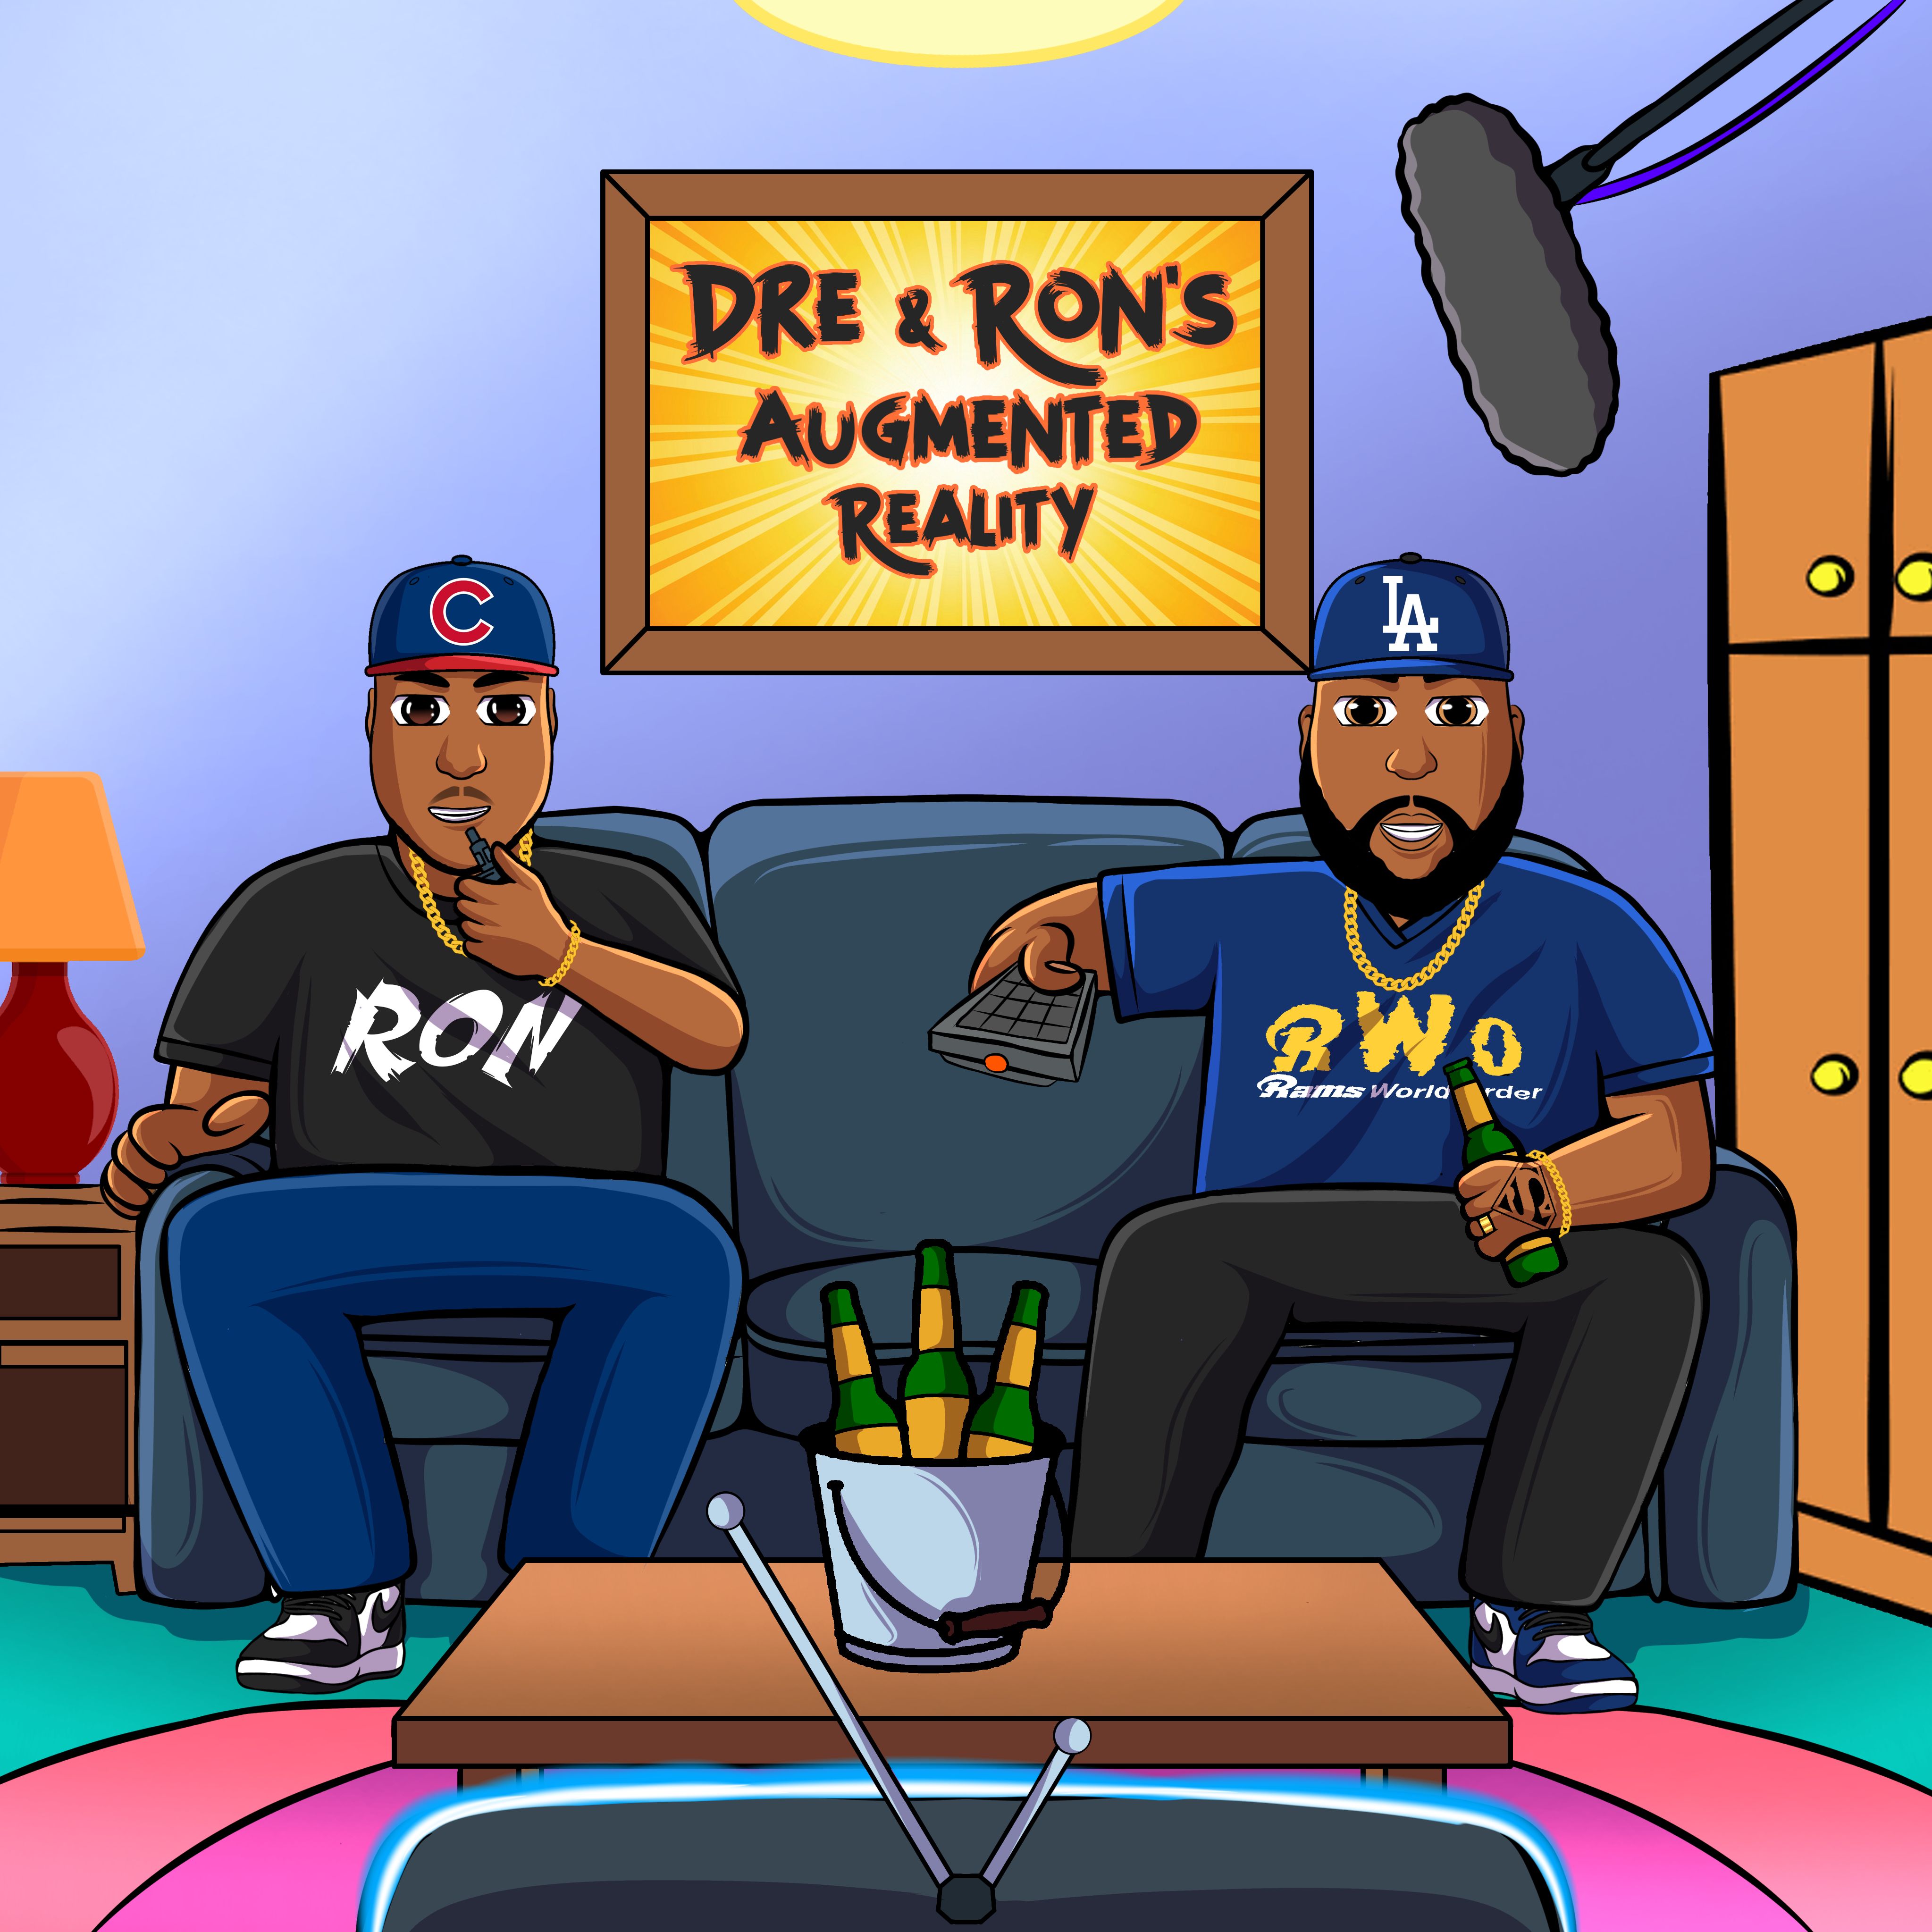 Dre & Ron's Augmented Reality